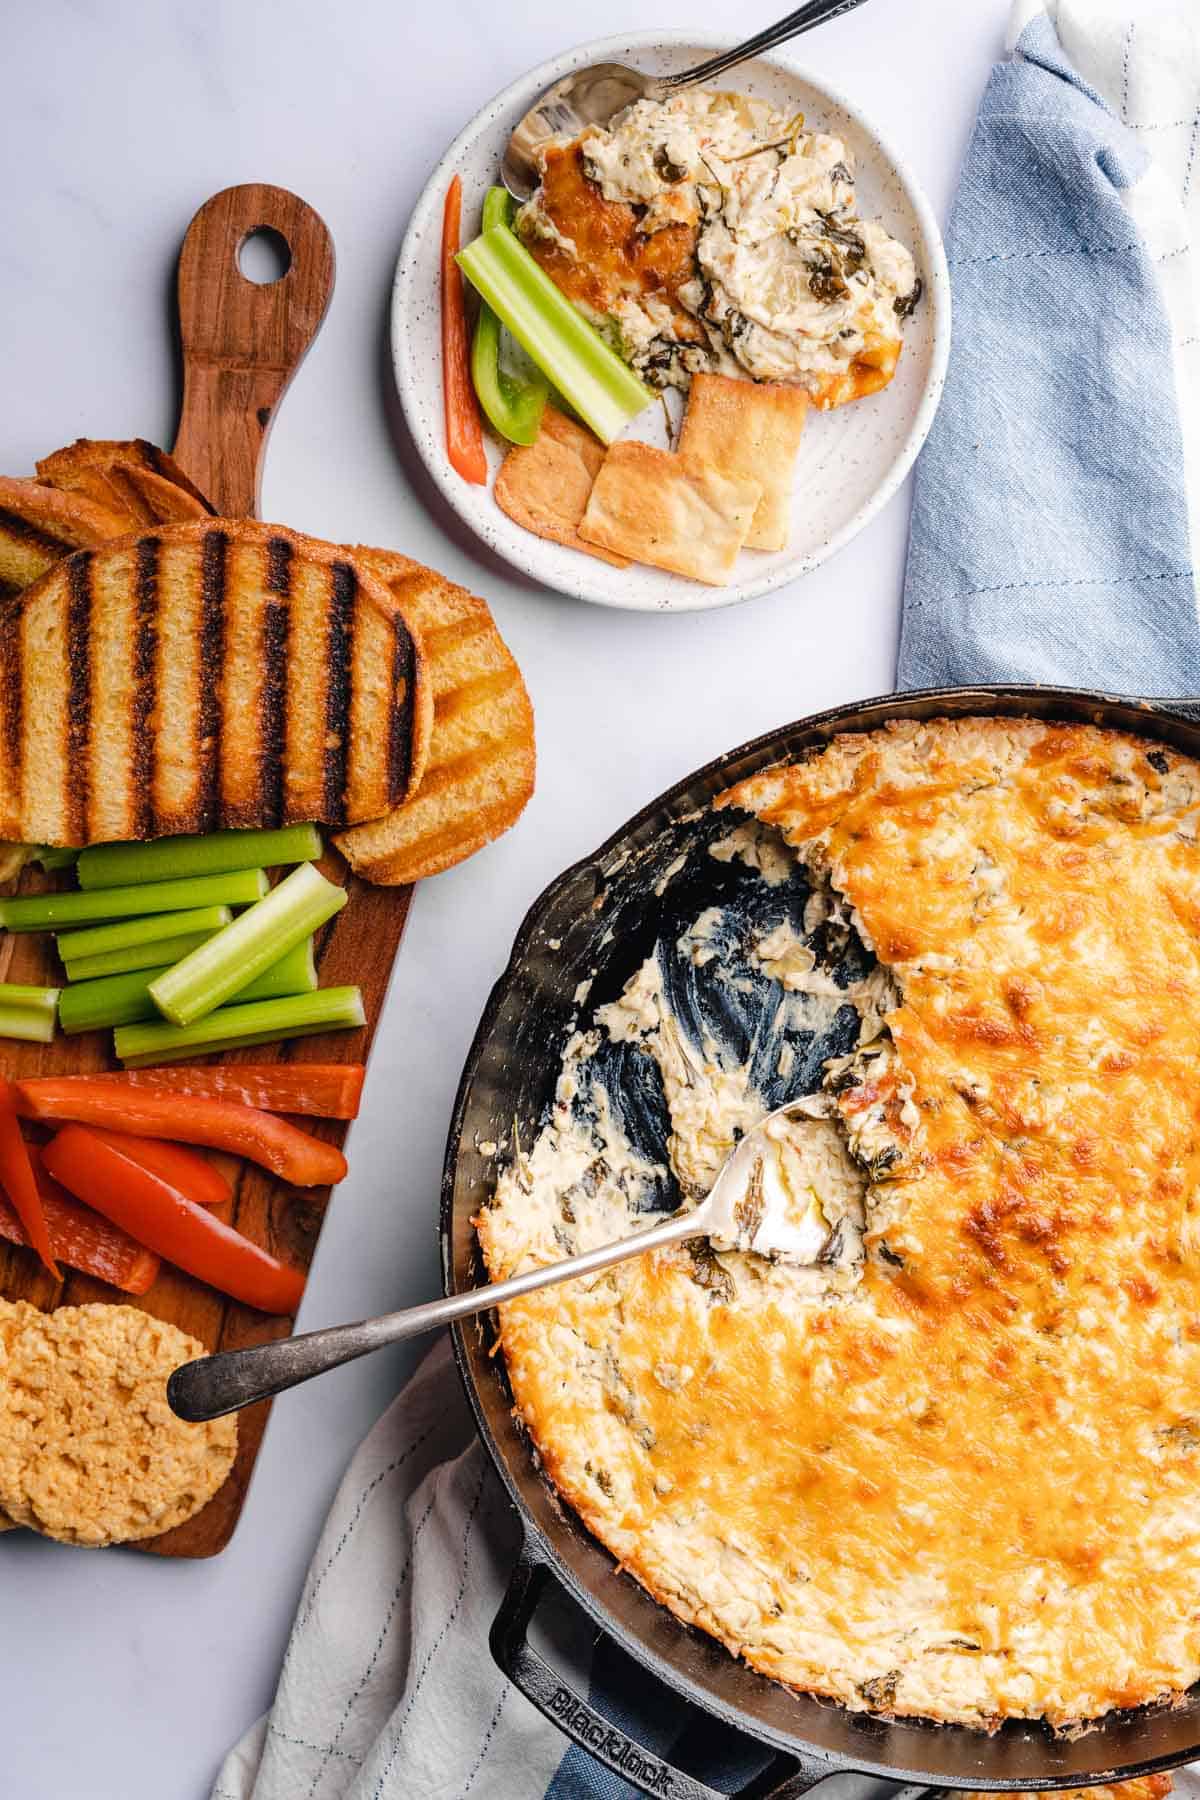 keto spinach artichoke dip in a cast iron skillet, with a large portion taken out of the side , and a plate of grilled sourdough, and vegetables close by